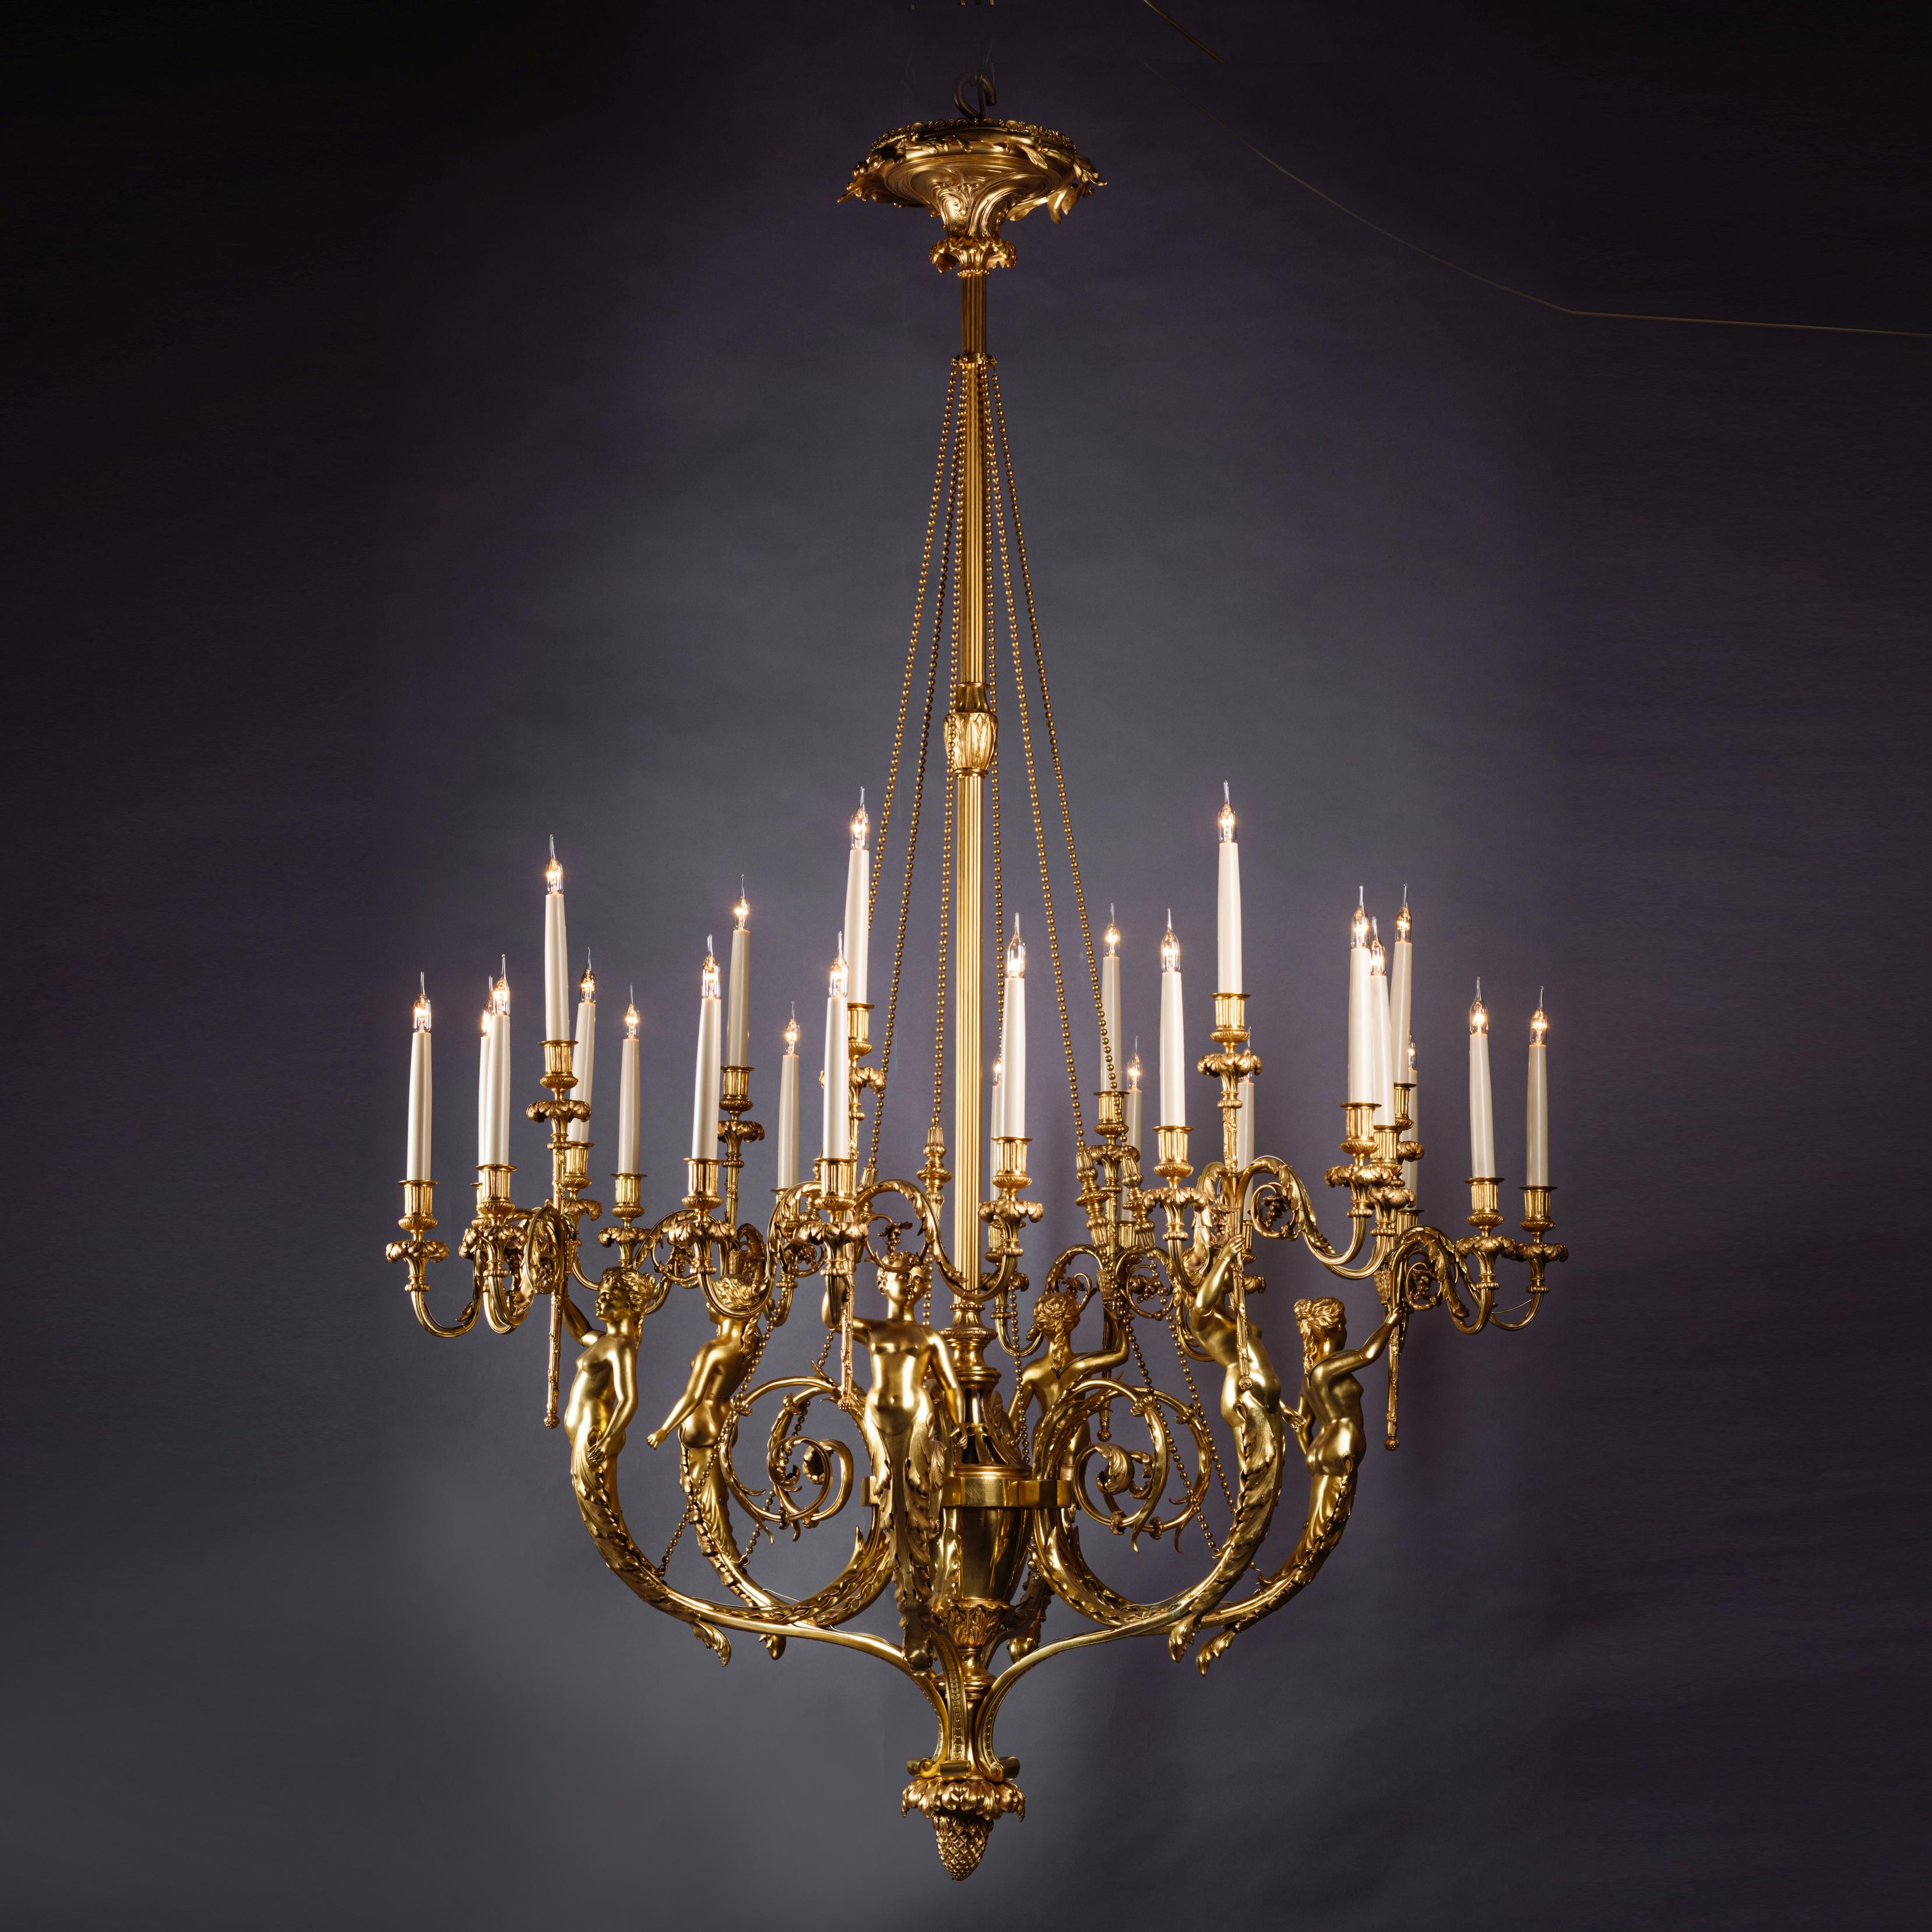 A magnificent Louis XVI Style gilt bronze twenty-four-light figural chandelier.

This fine chandelier is of large size at over 185 cm (73 inches) high. Finely cast in gilt bronze it features a fluted central stem with suspended beaded chains above